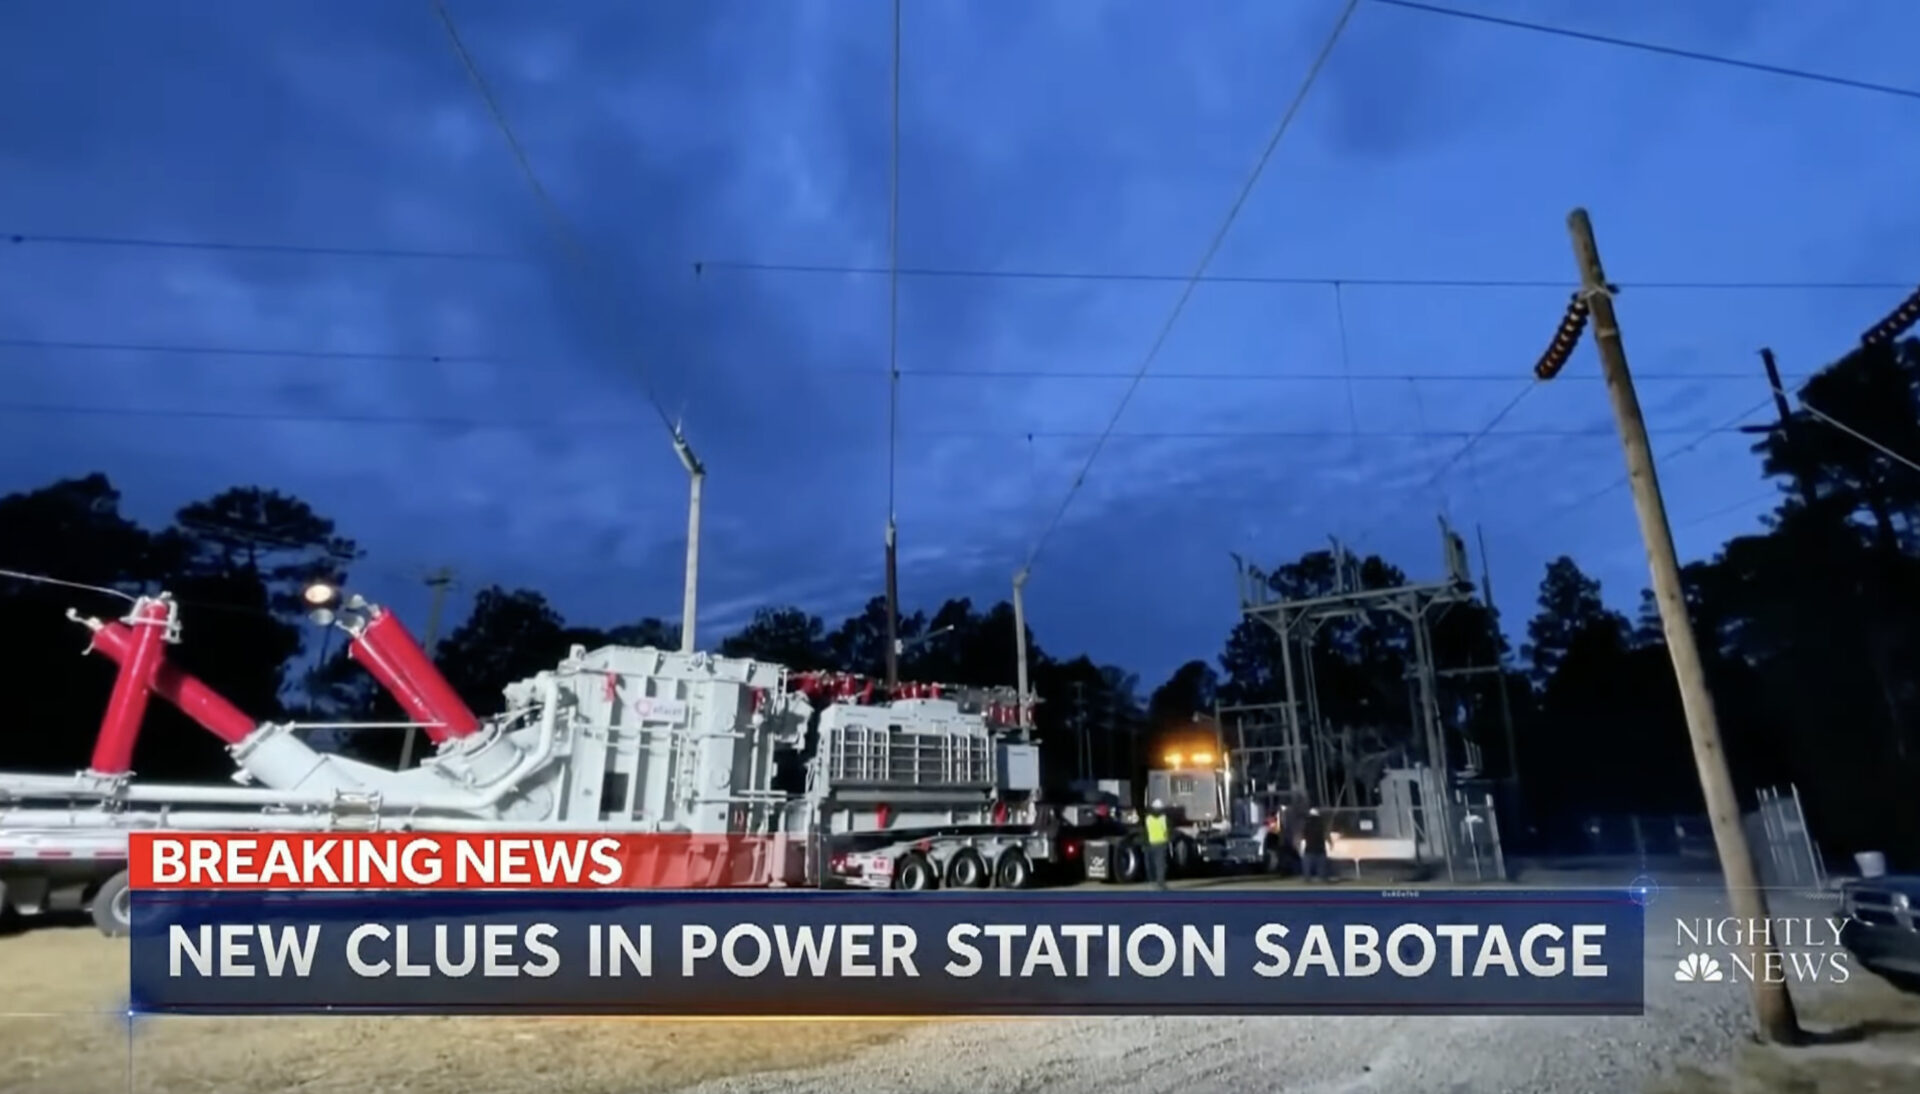 New clues in power station sabotage